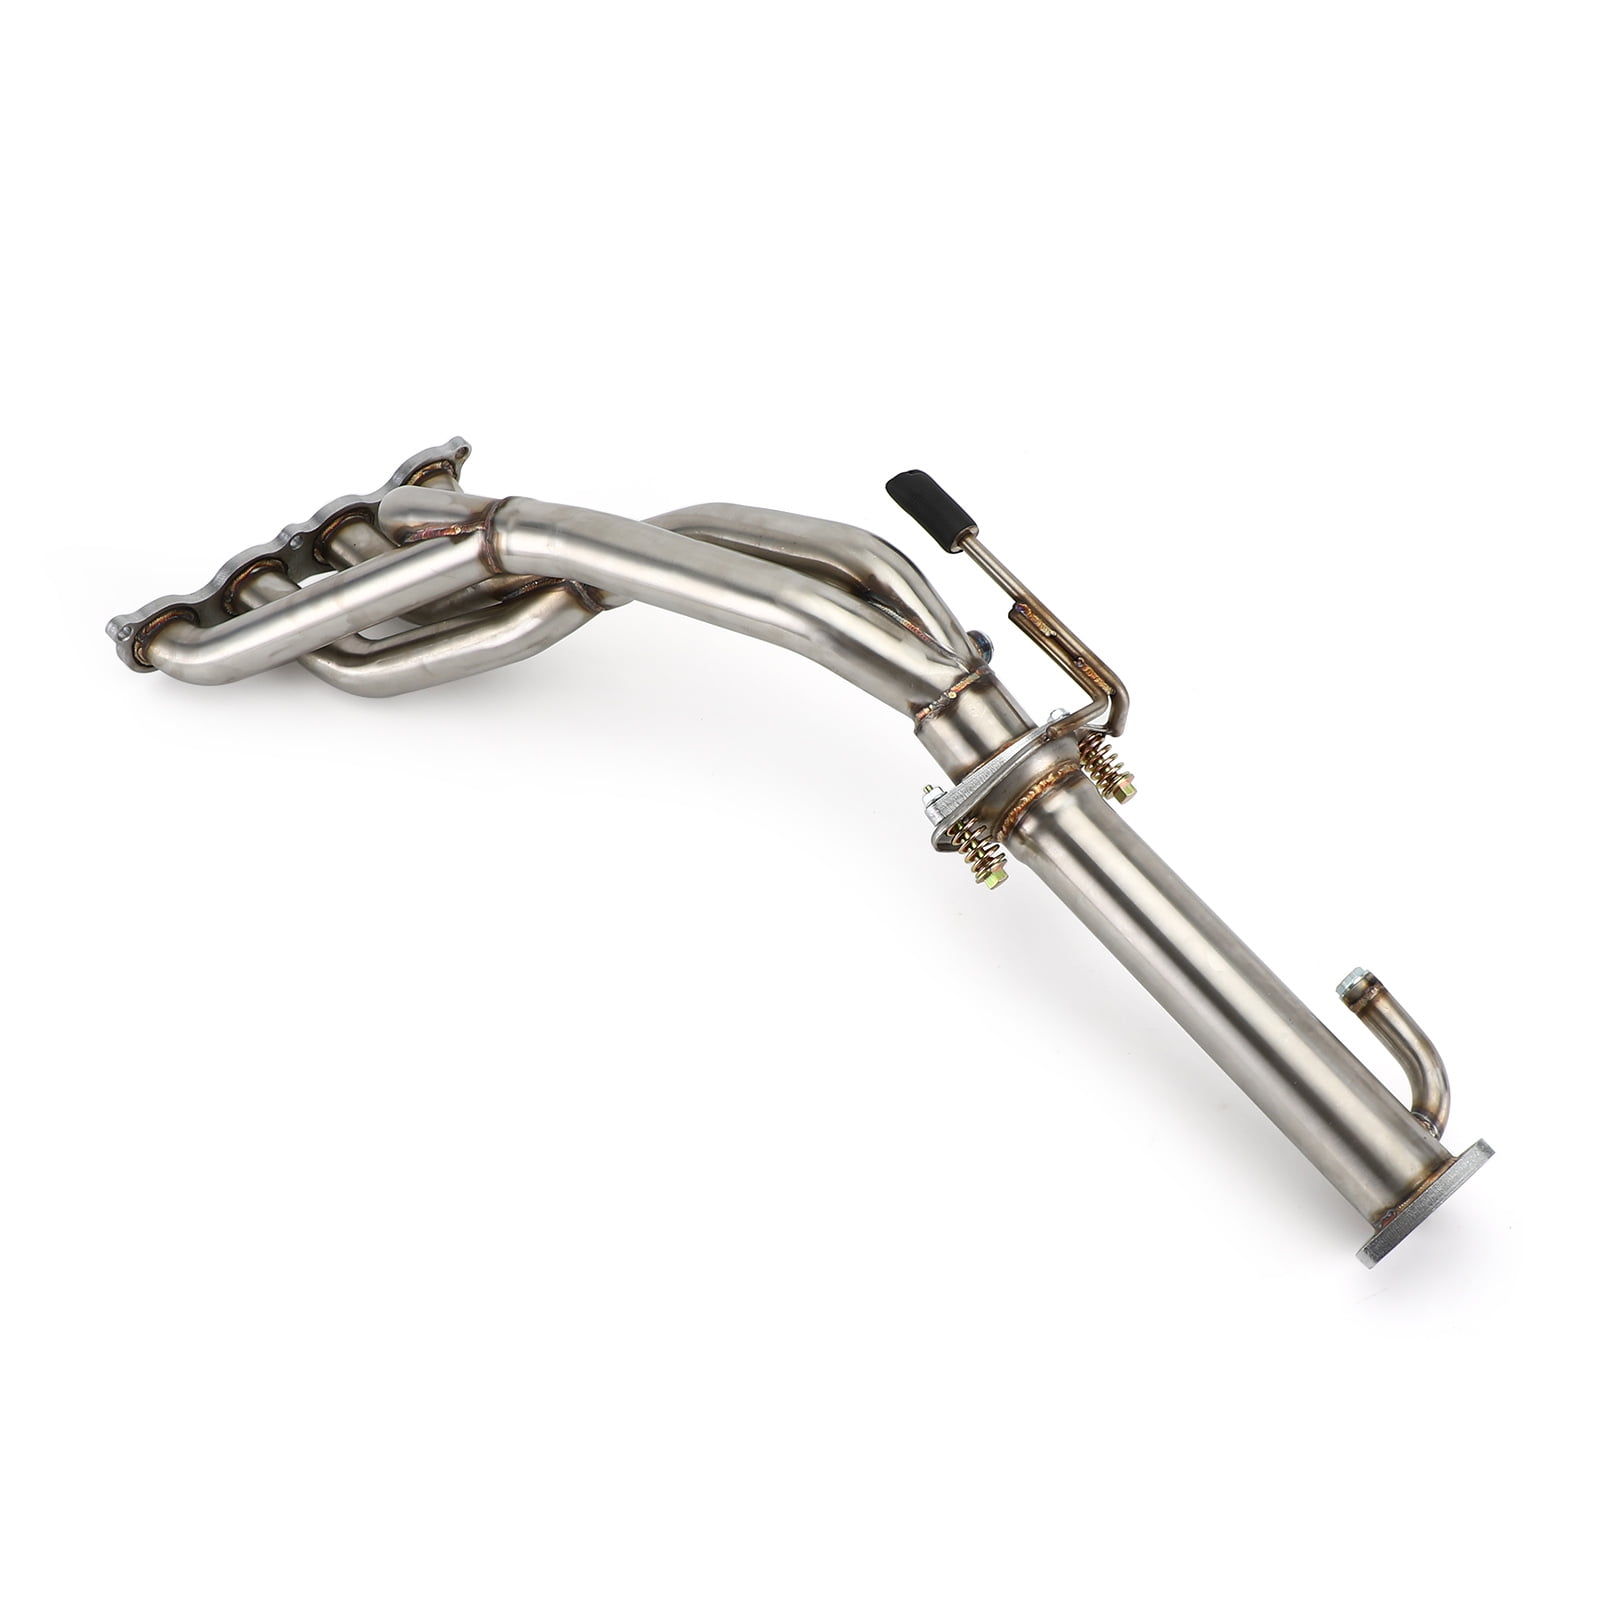 For Honda Civic FA/FG 1.8L l4 Stainless Steel Racing Exhuast Header